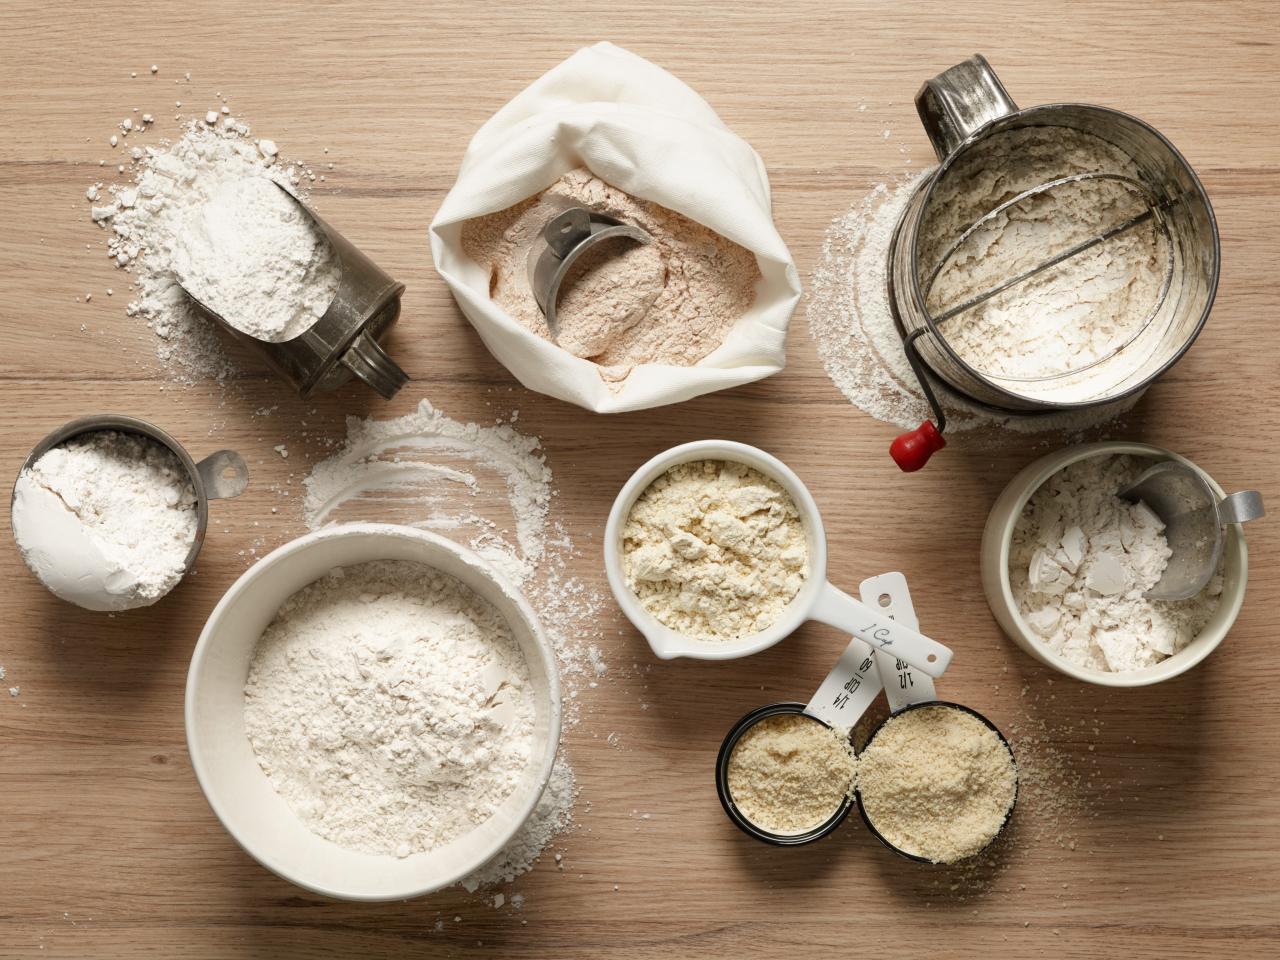 101 uses for baking powder recipes